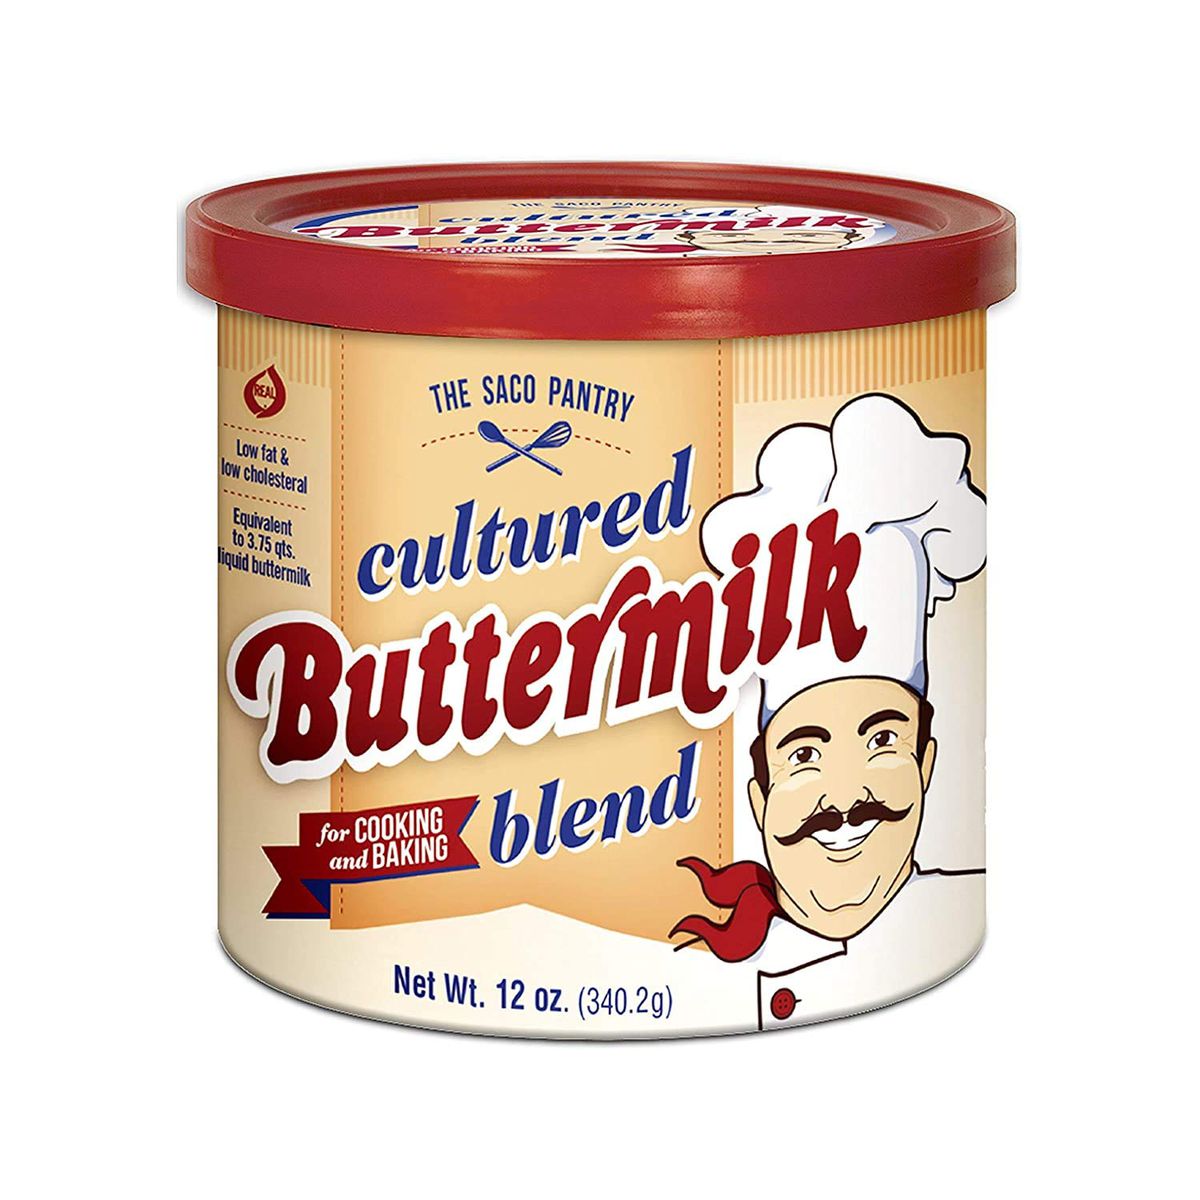 A container of powdered buttermilk